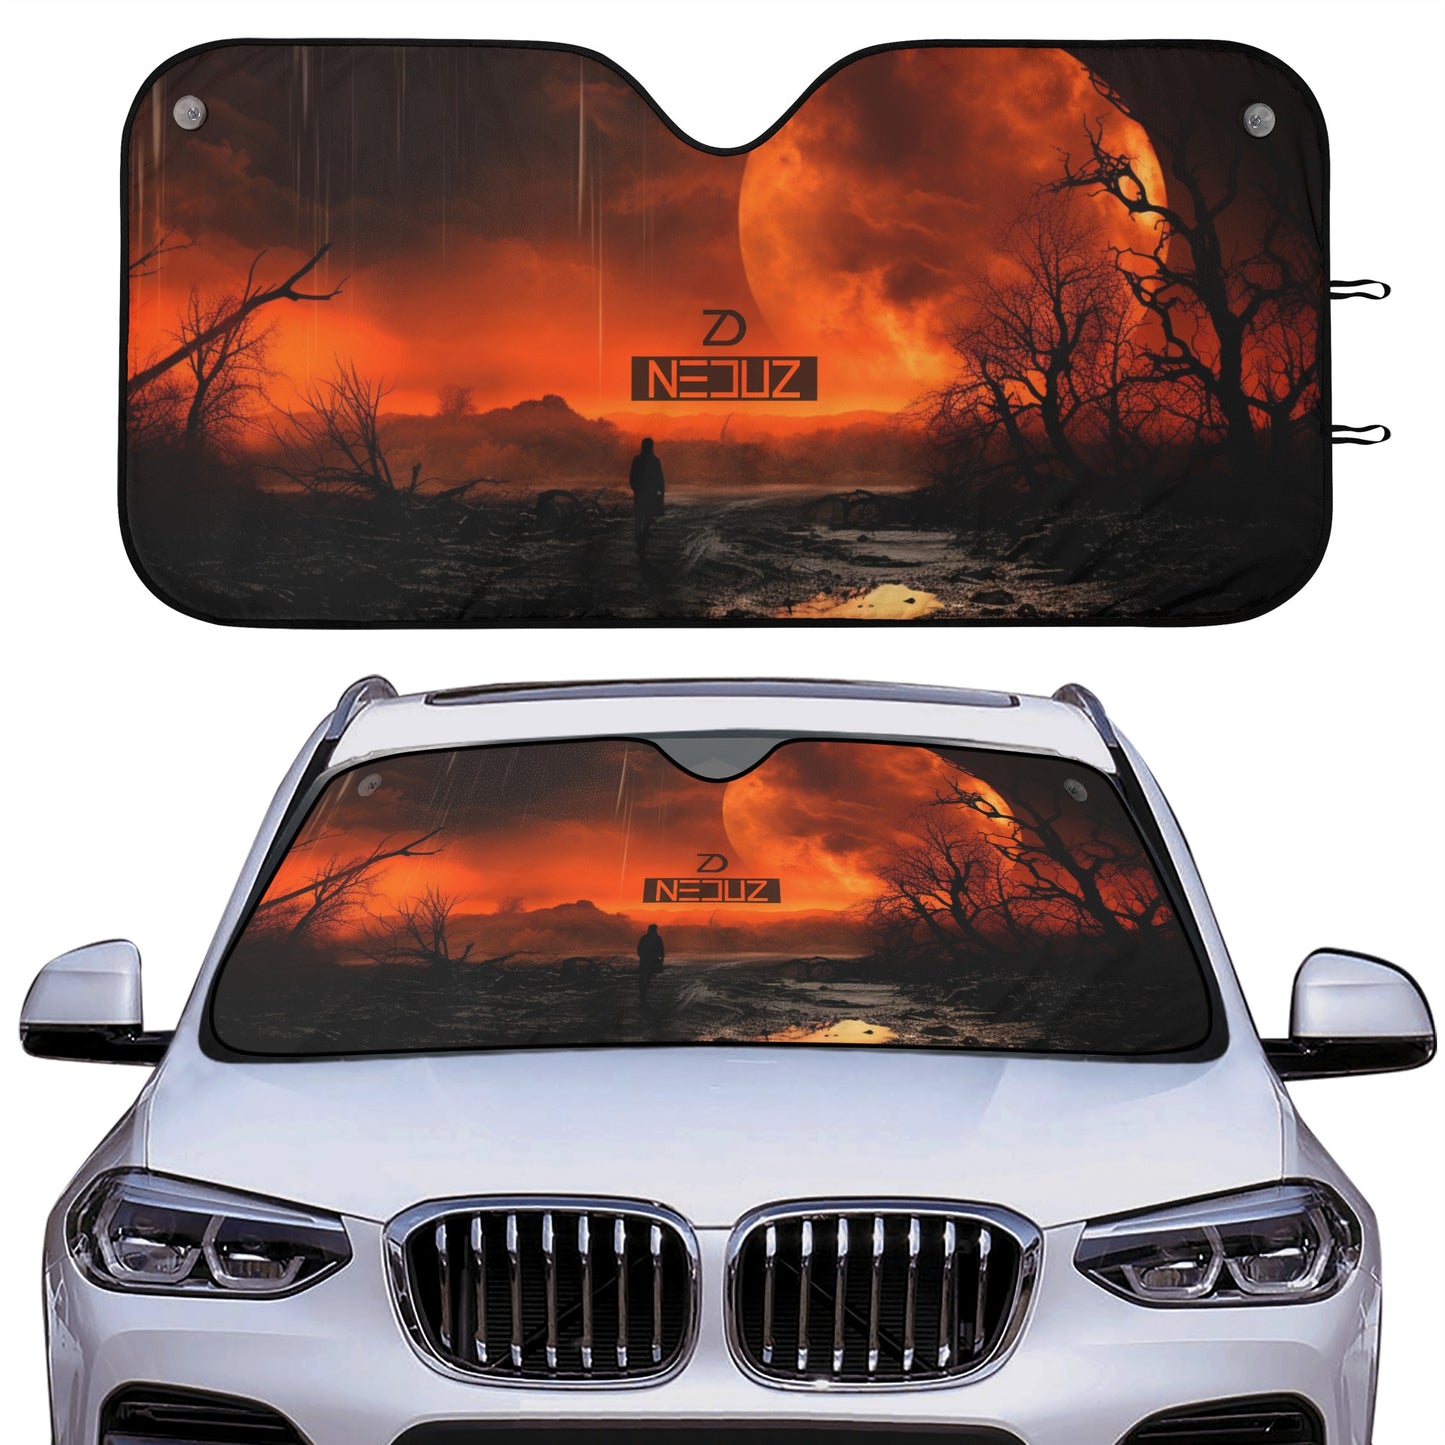 Neduz Crimson Sun Car Auto Sun Shade: Protect Your Car and Stay Cool in the Summer